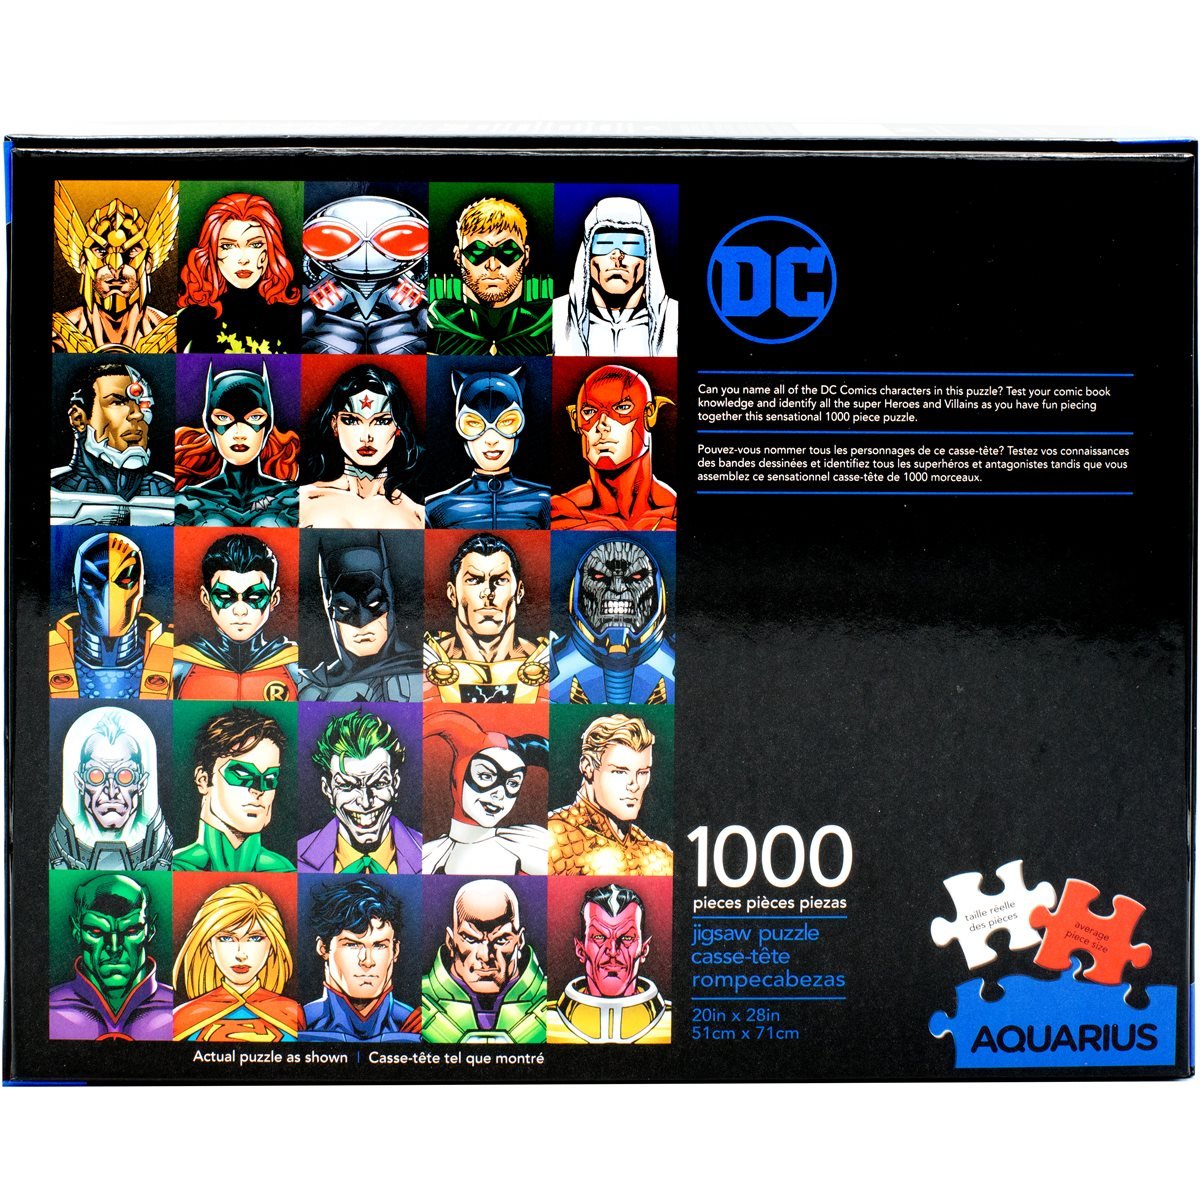 DC COMICS CHARACTER FACES 1000 PIECE JIGSAW PUZZLE BRAND NEW 65359 